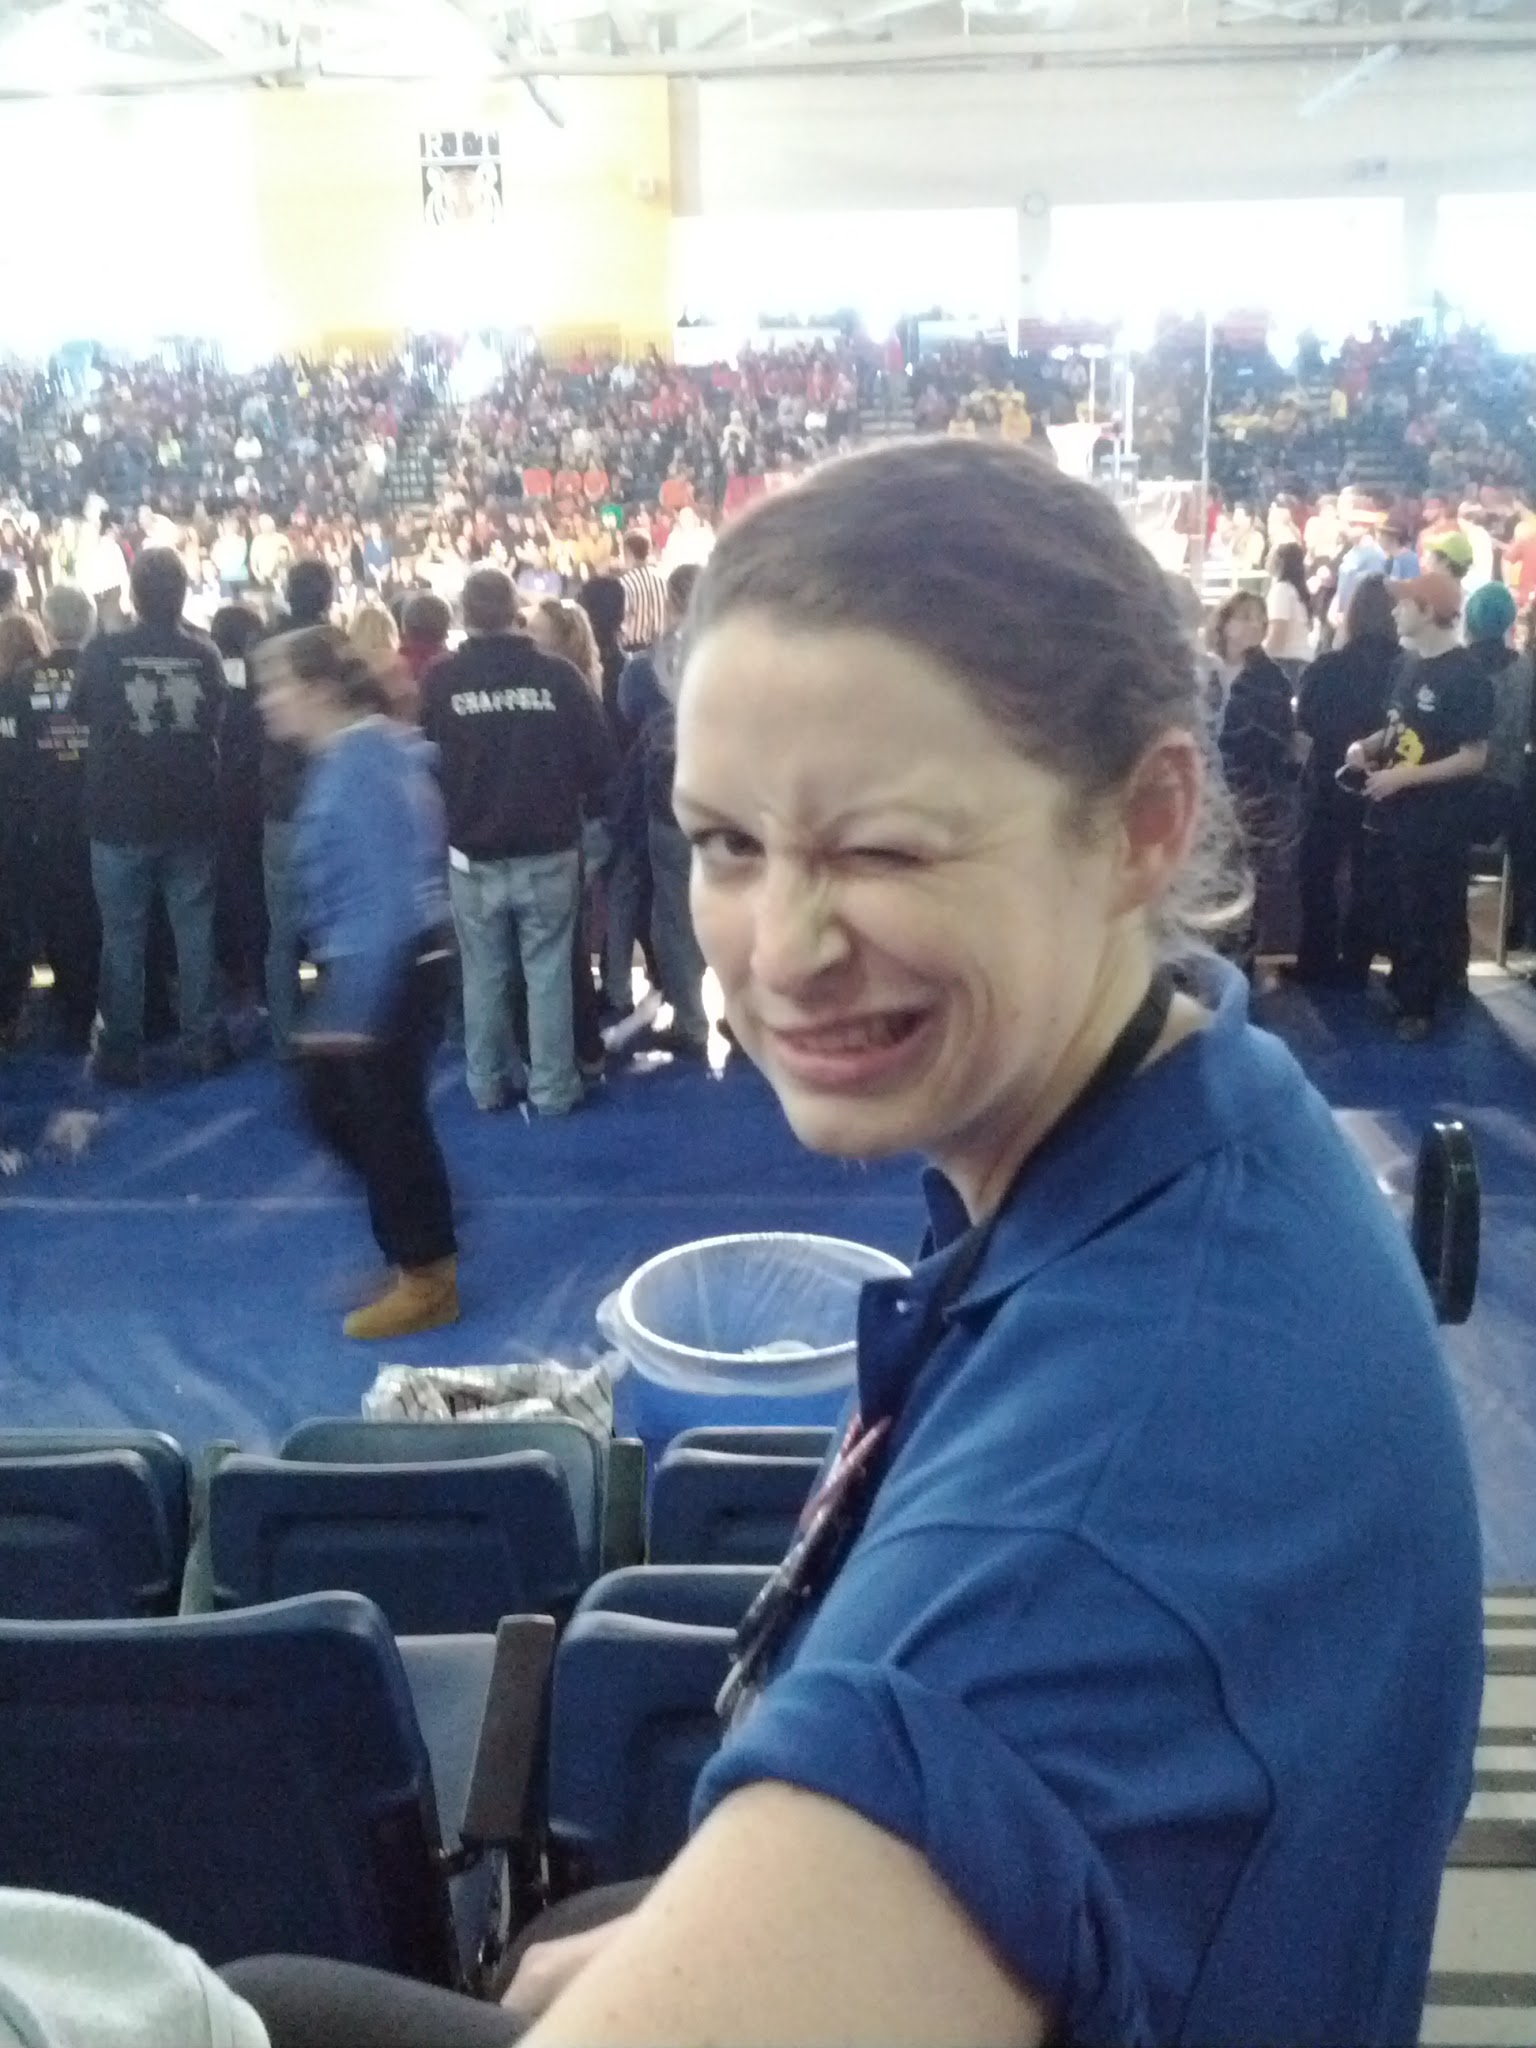 Tenrehte CEO Jennifer Indovina @ Rebound Rumble, the 2012 FIRST Robotics Competition at RIT